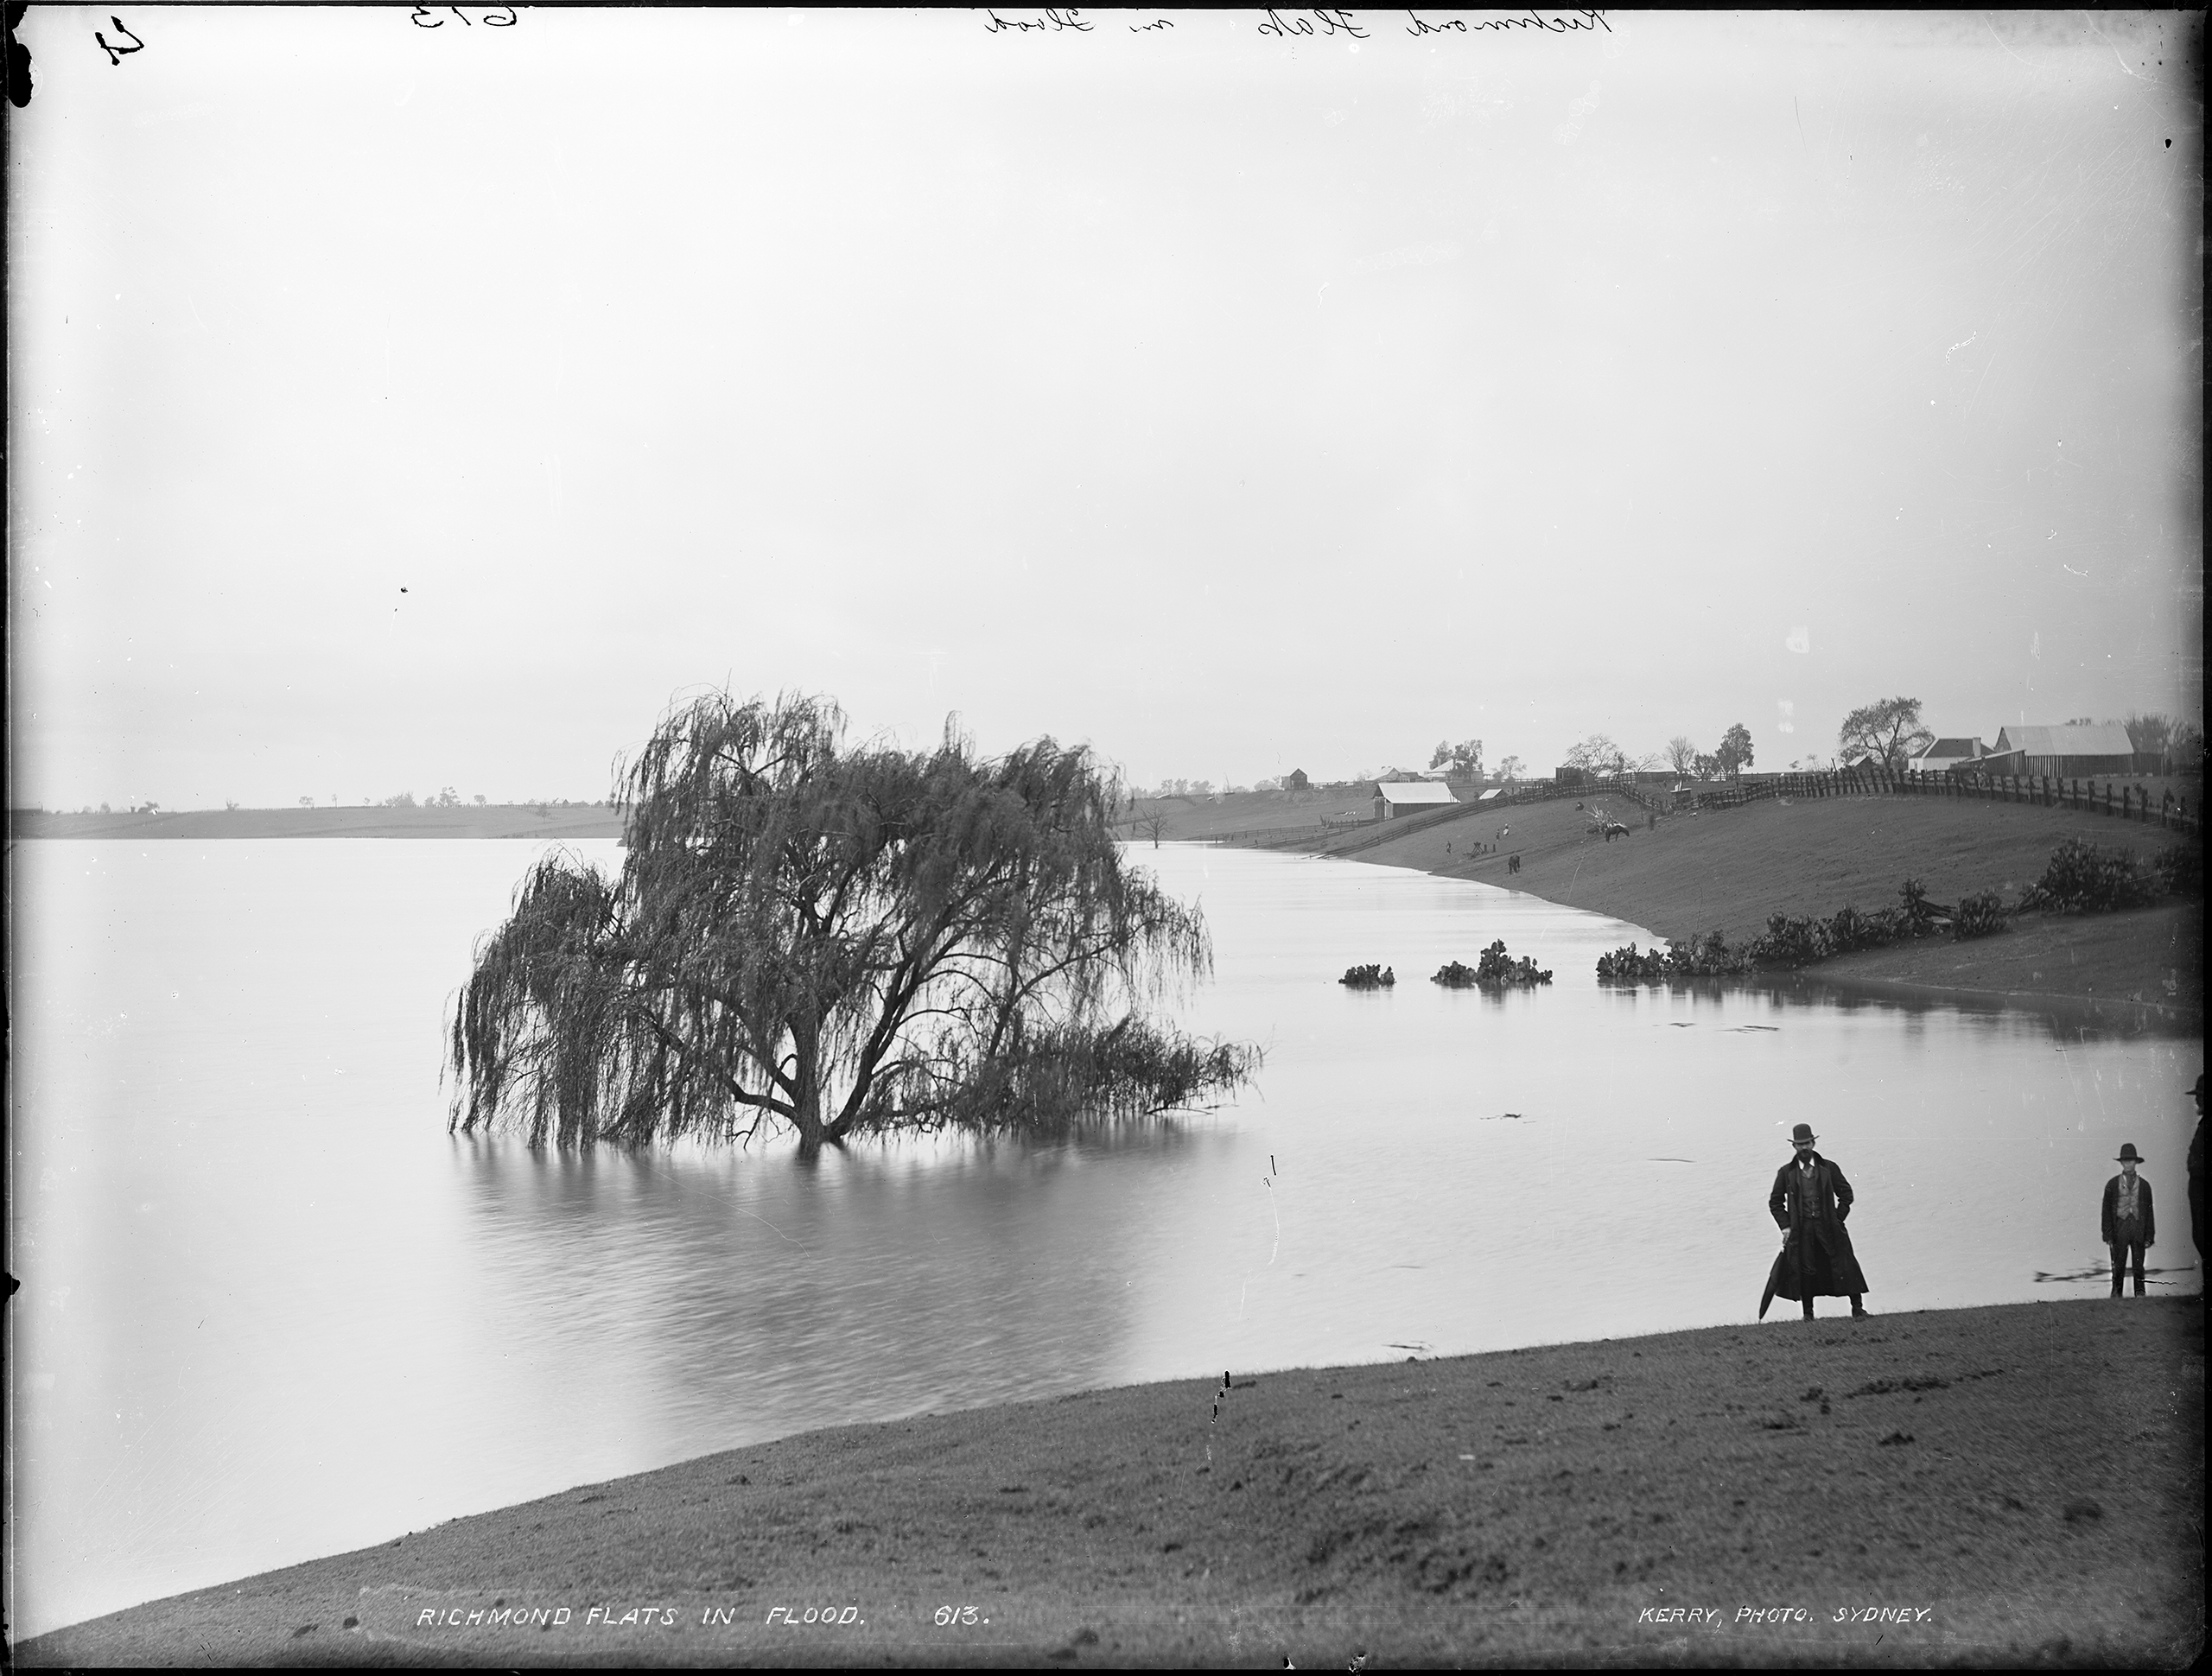 'Richmond Flats in Flood' by Kerry and Co from the Tyrrell Collection